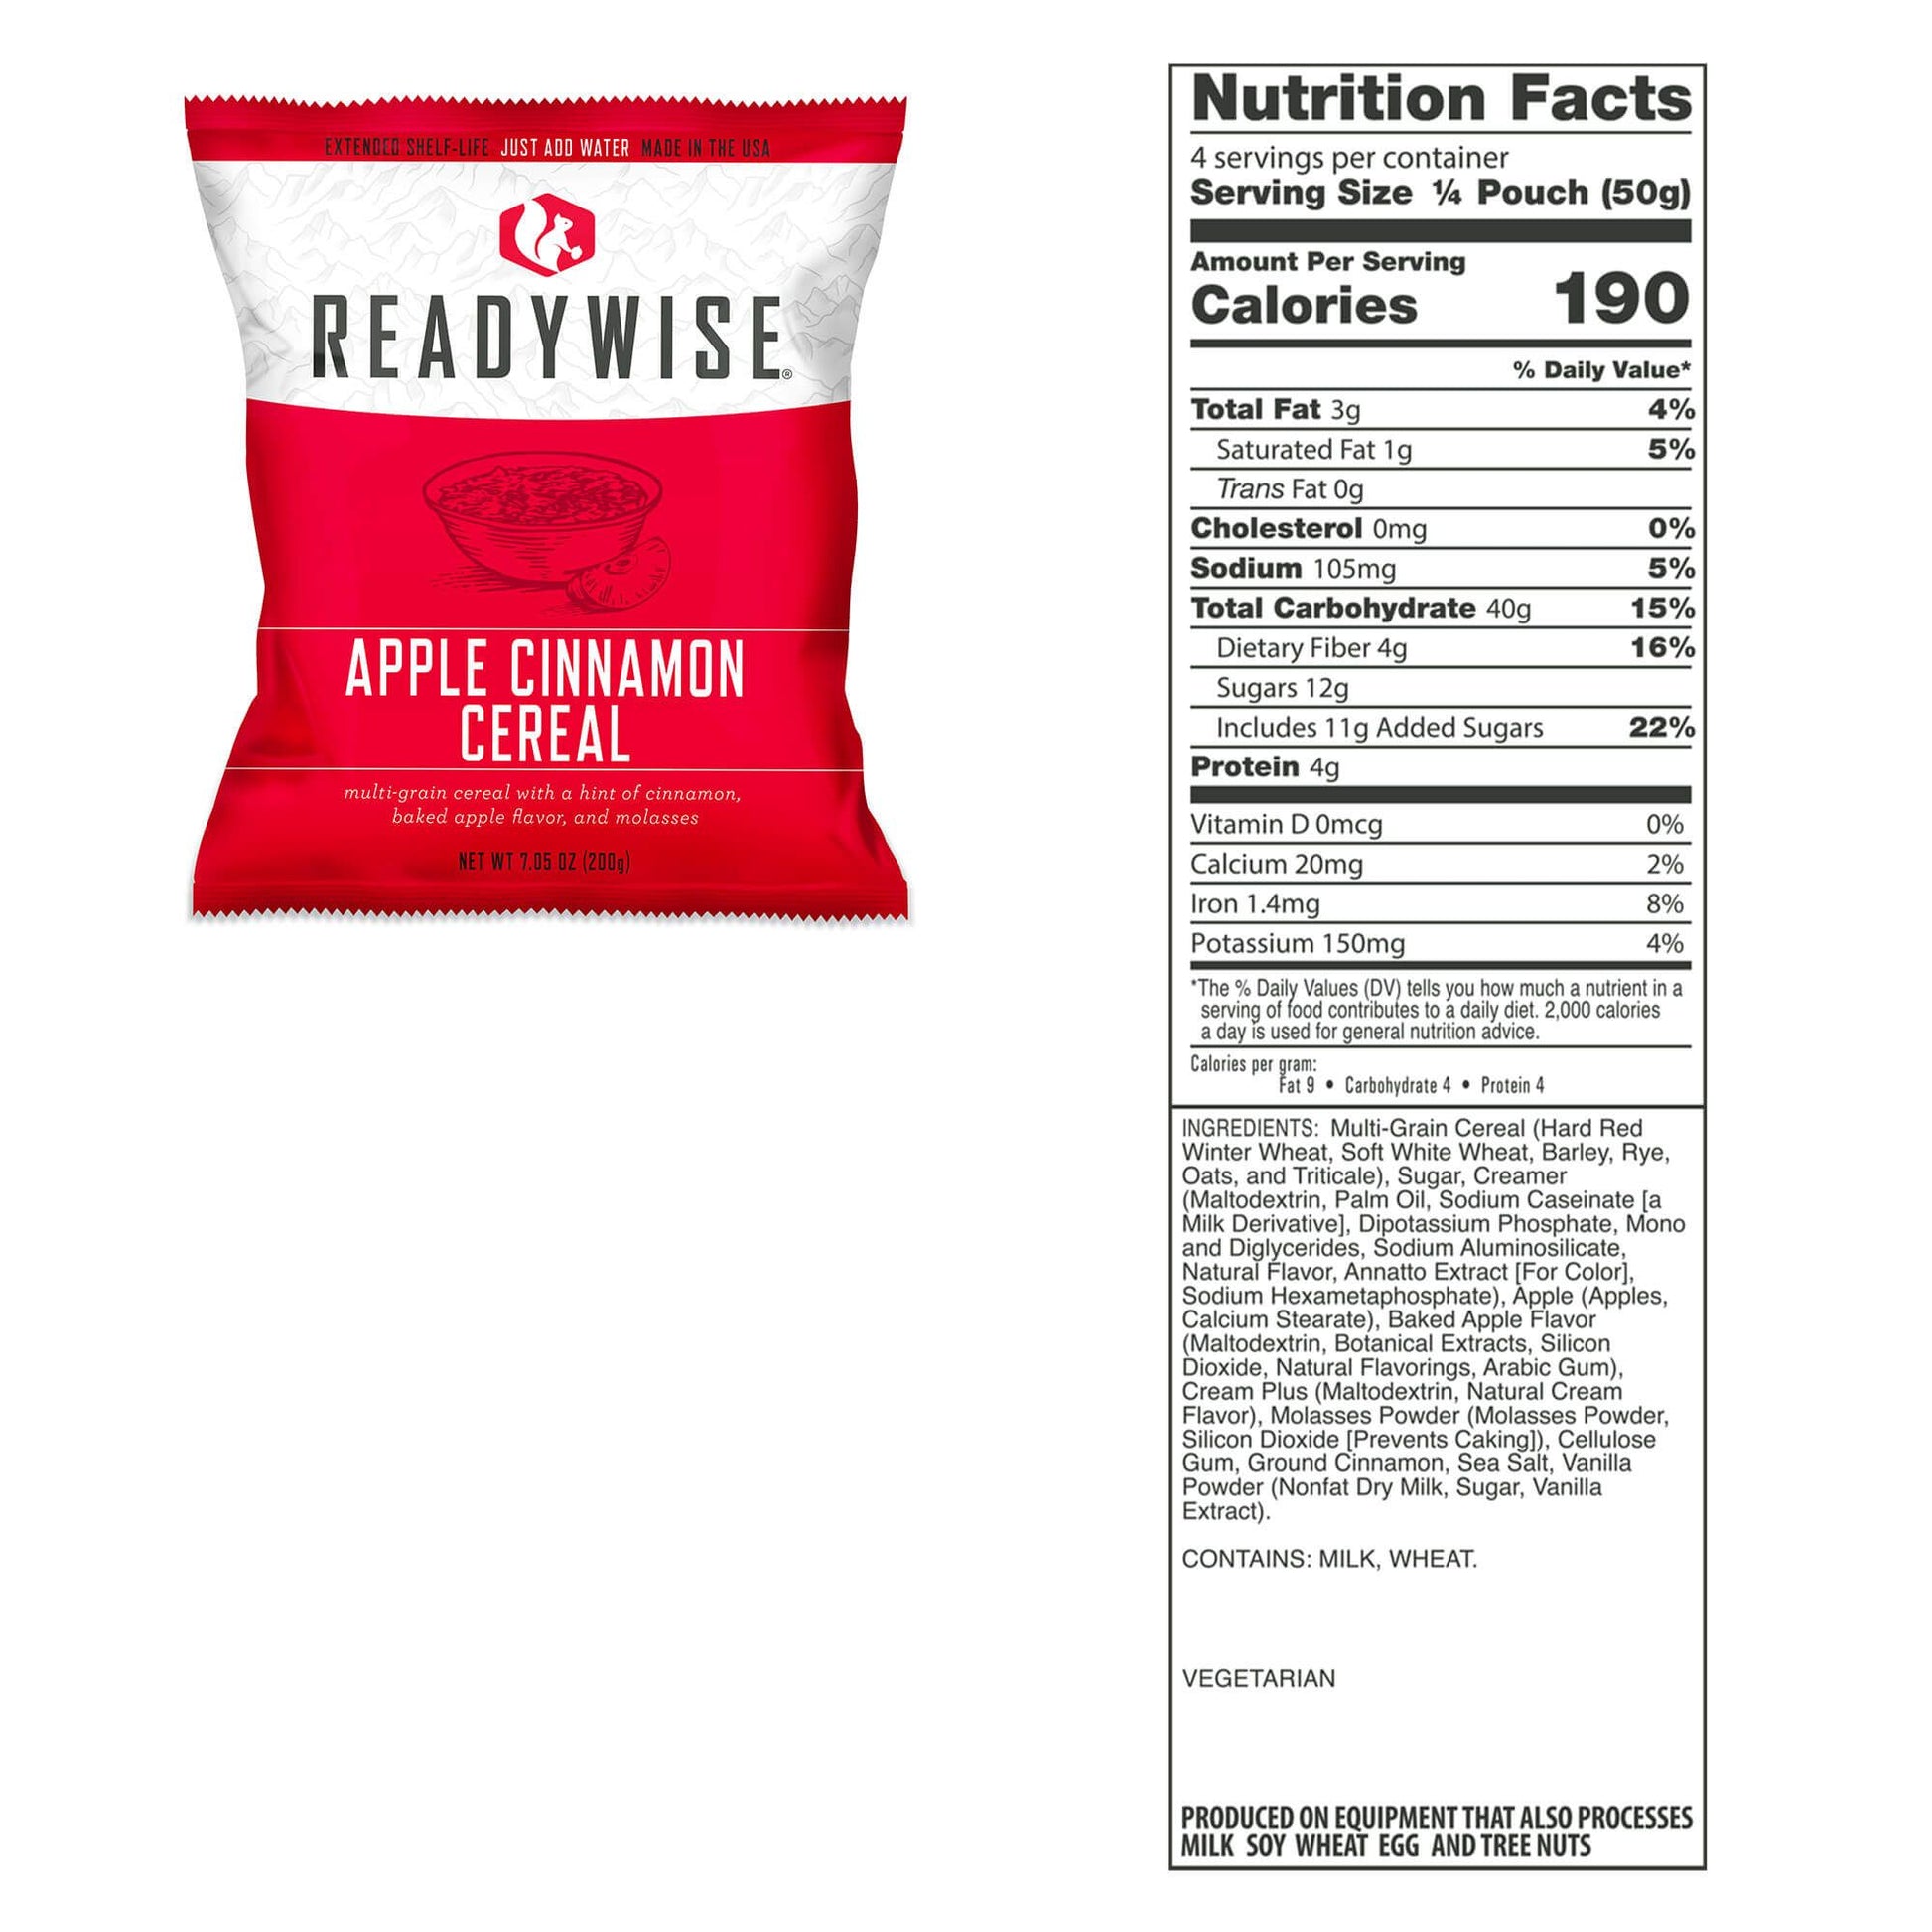 Apple Cinnamon Cereal packet with nutritional information